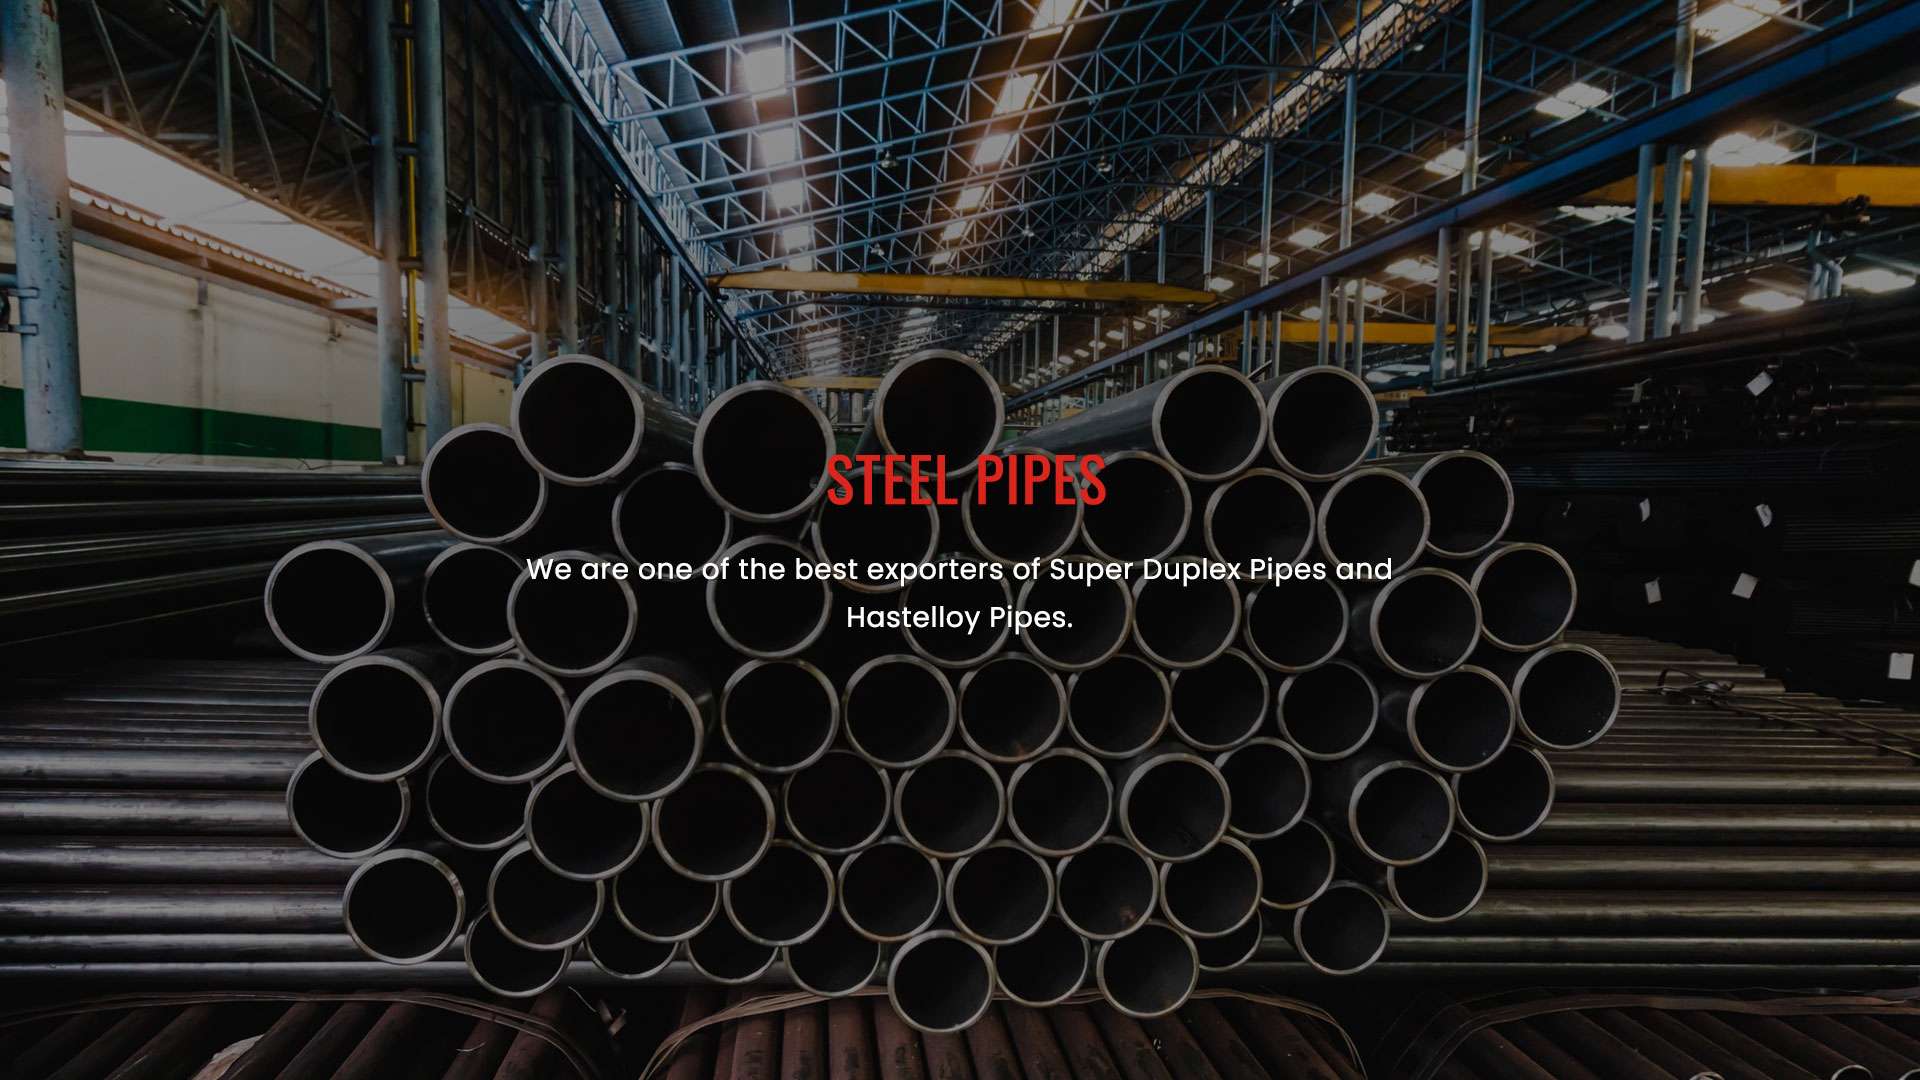  Steel Pipes Manufacturers in United States